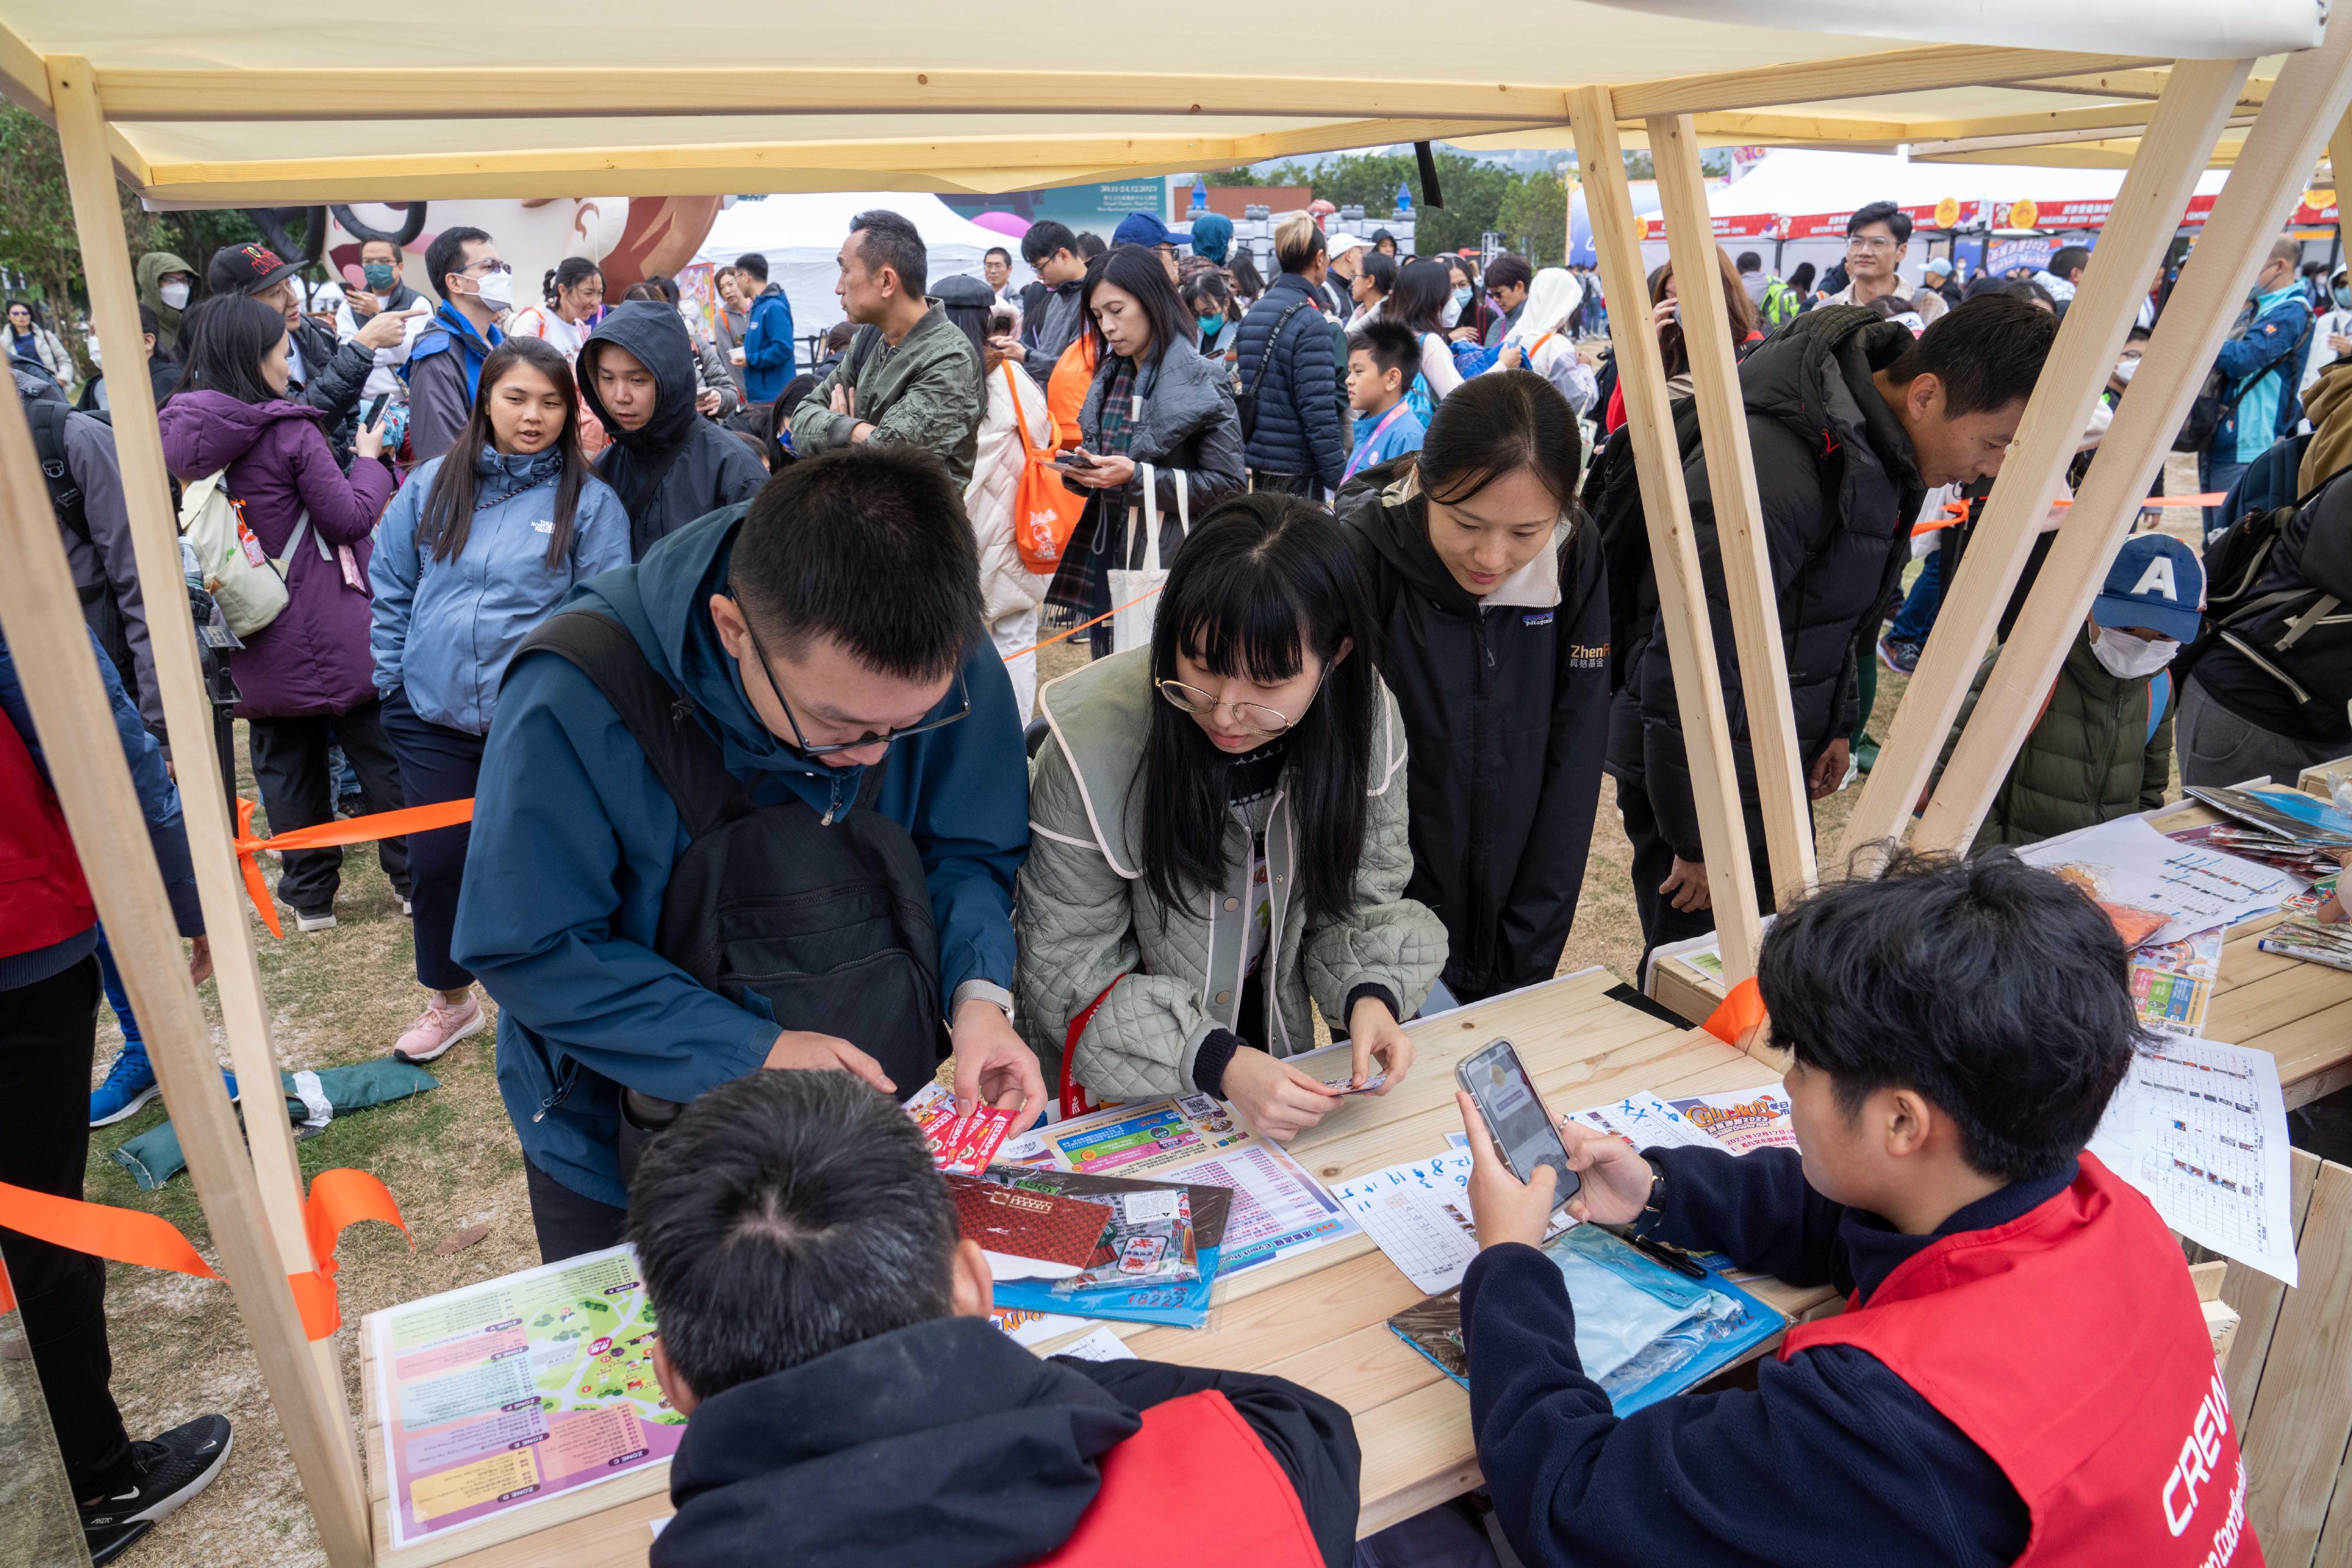 The Anti-Deception Coordination Centre of the Hong Kong Police Force organises the "West Kowloon CHILL RUN Winter Market cum Anti-Scam Charity Run 2023" at the West Kowloon Cultural District today (December 17). Photo shows the event booths promoting scam prevention messages, which attracted a large number of members of the public to visit.